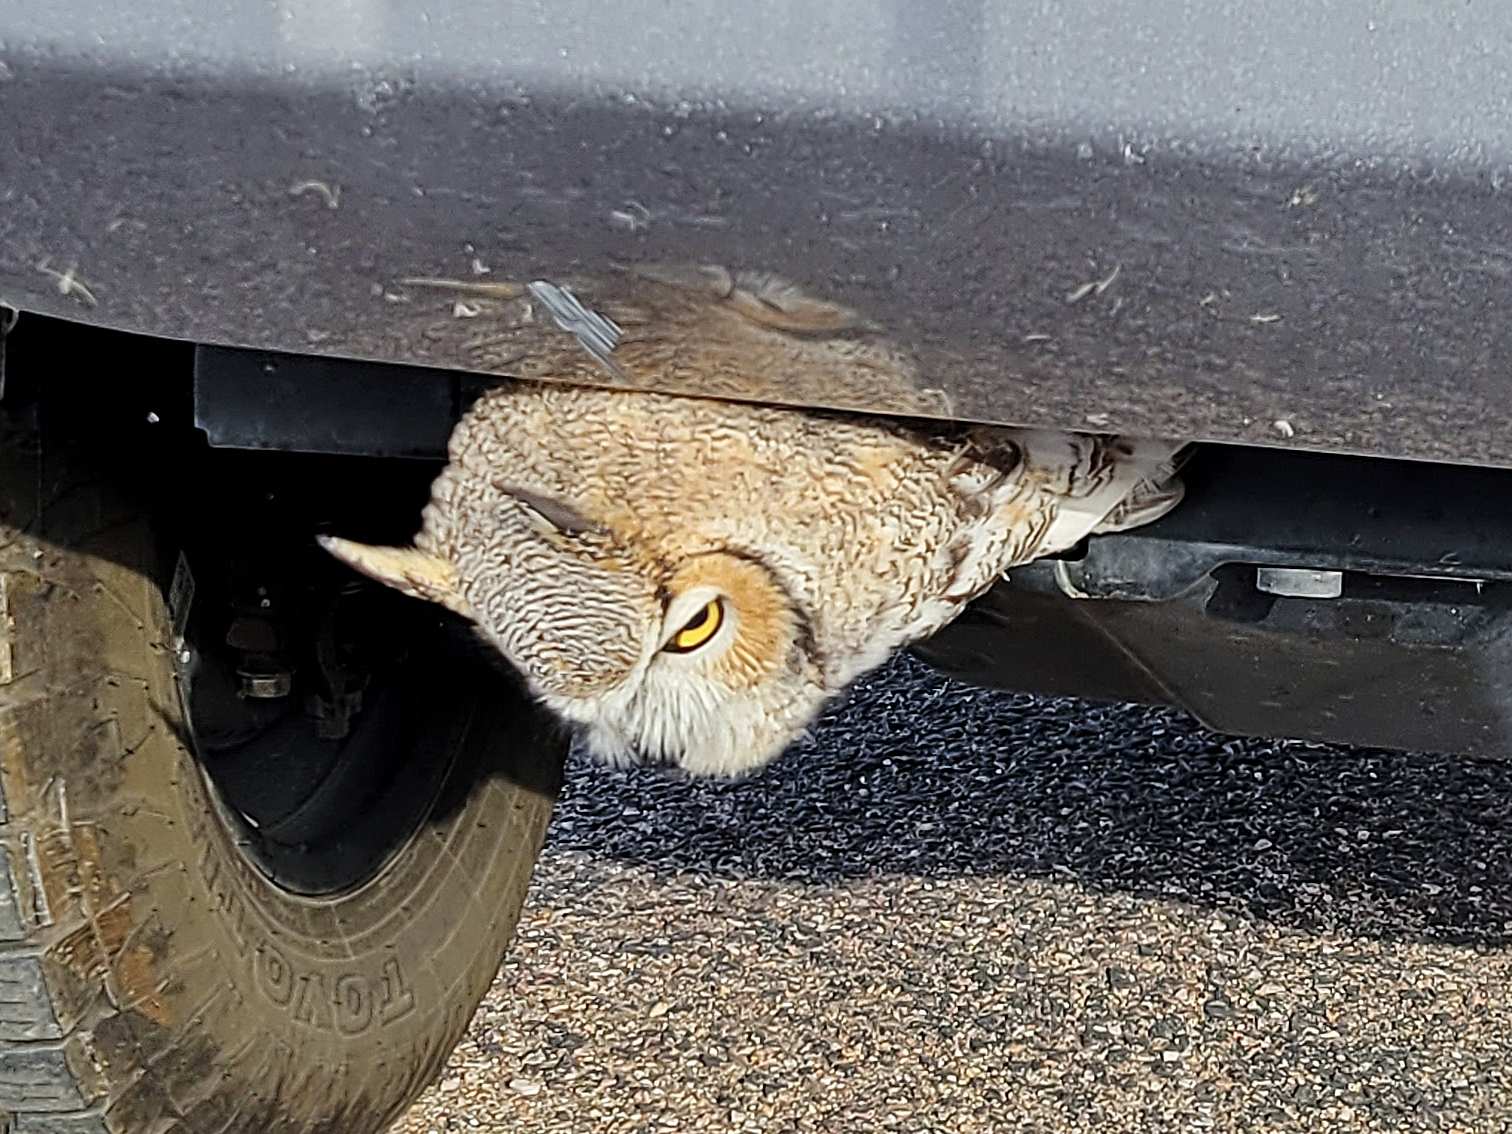 Passerby notices creature stuck in truck’s grille — then rescue begins, CO photos show